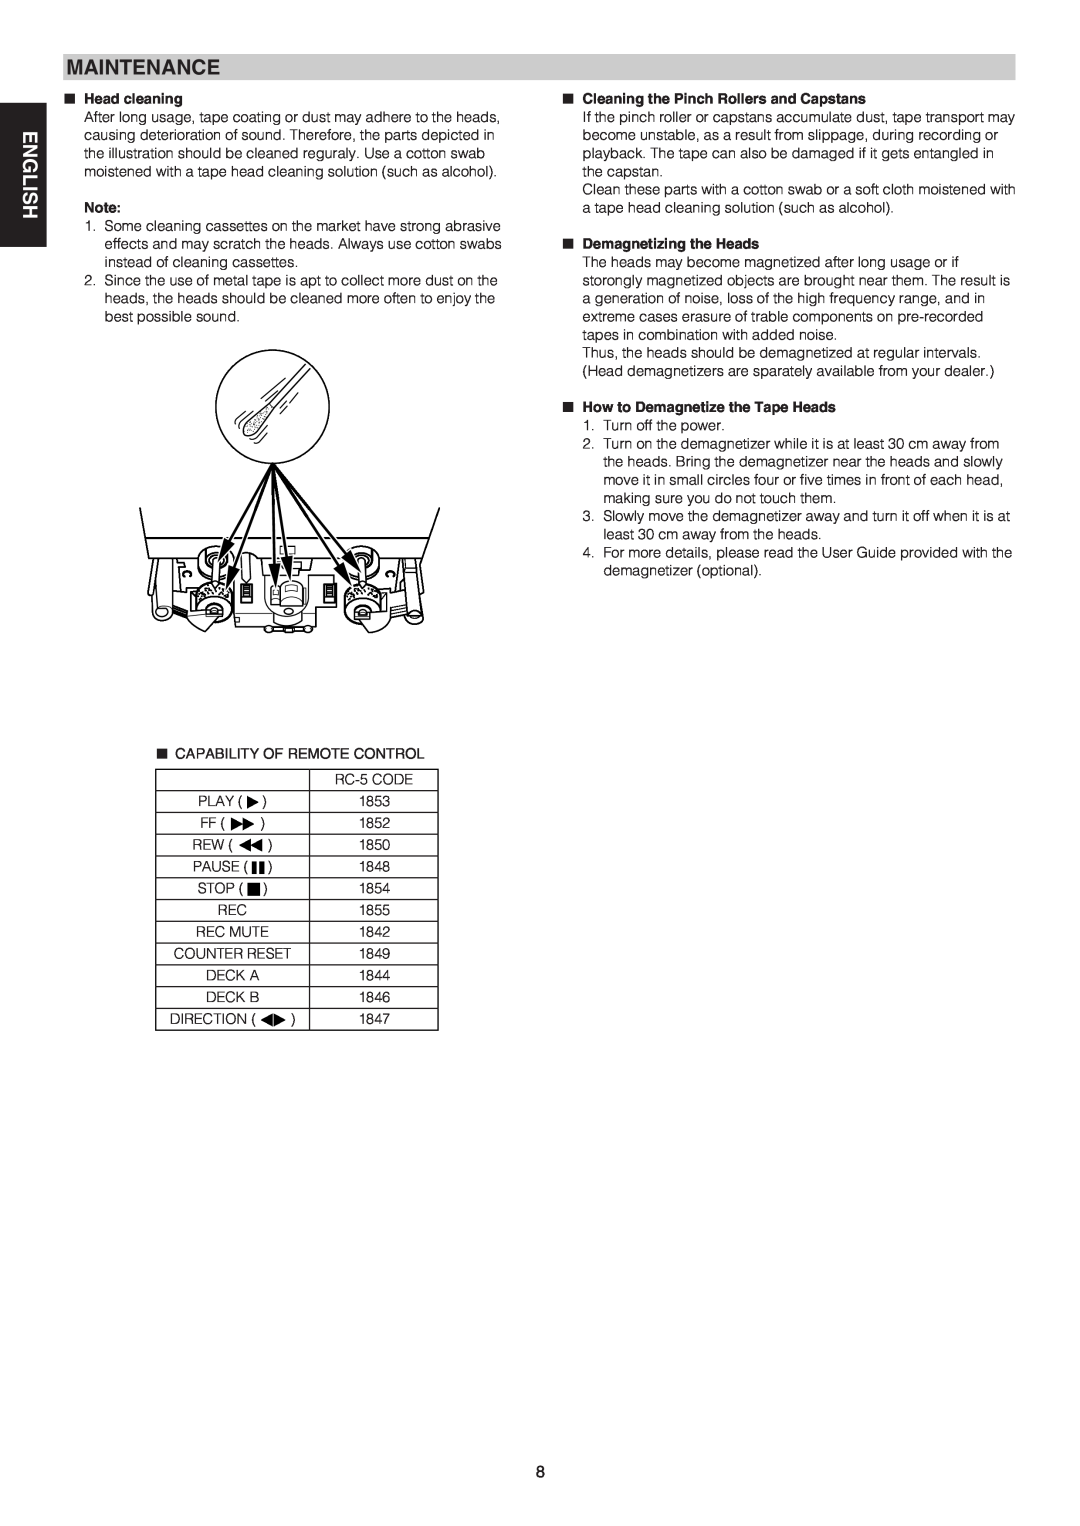 Marantz PMD505 manual English Français Español, Maintenance, Head cleaning, Cleaning the Pinch Rollers and Capstans 